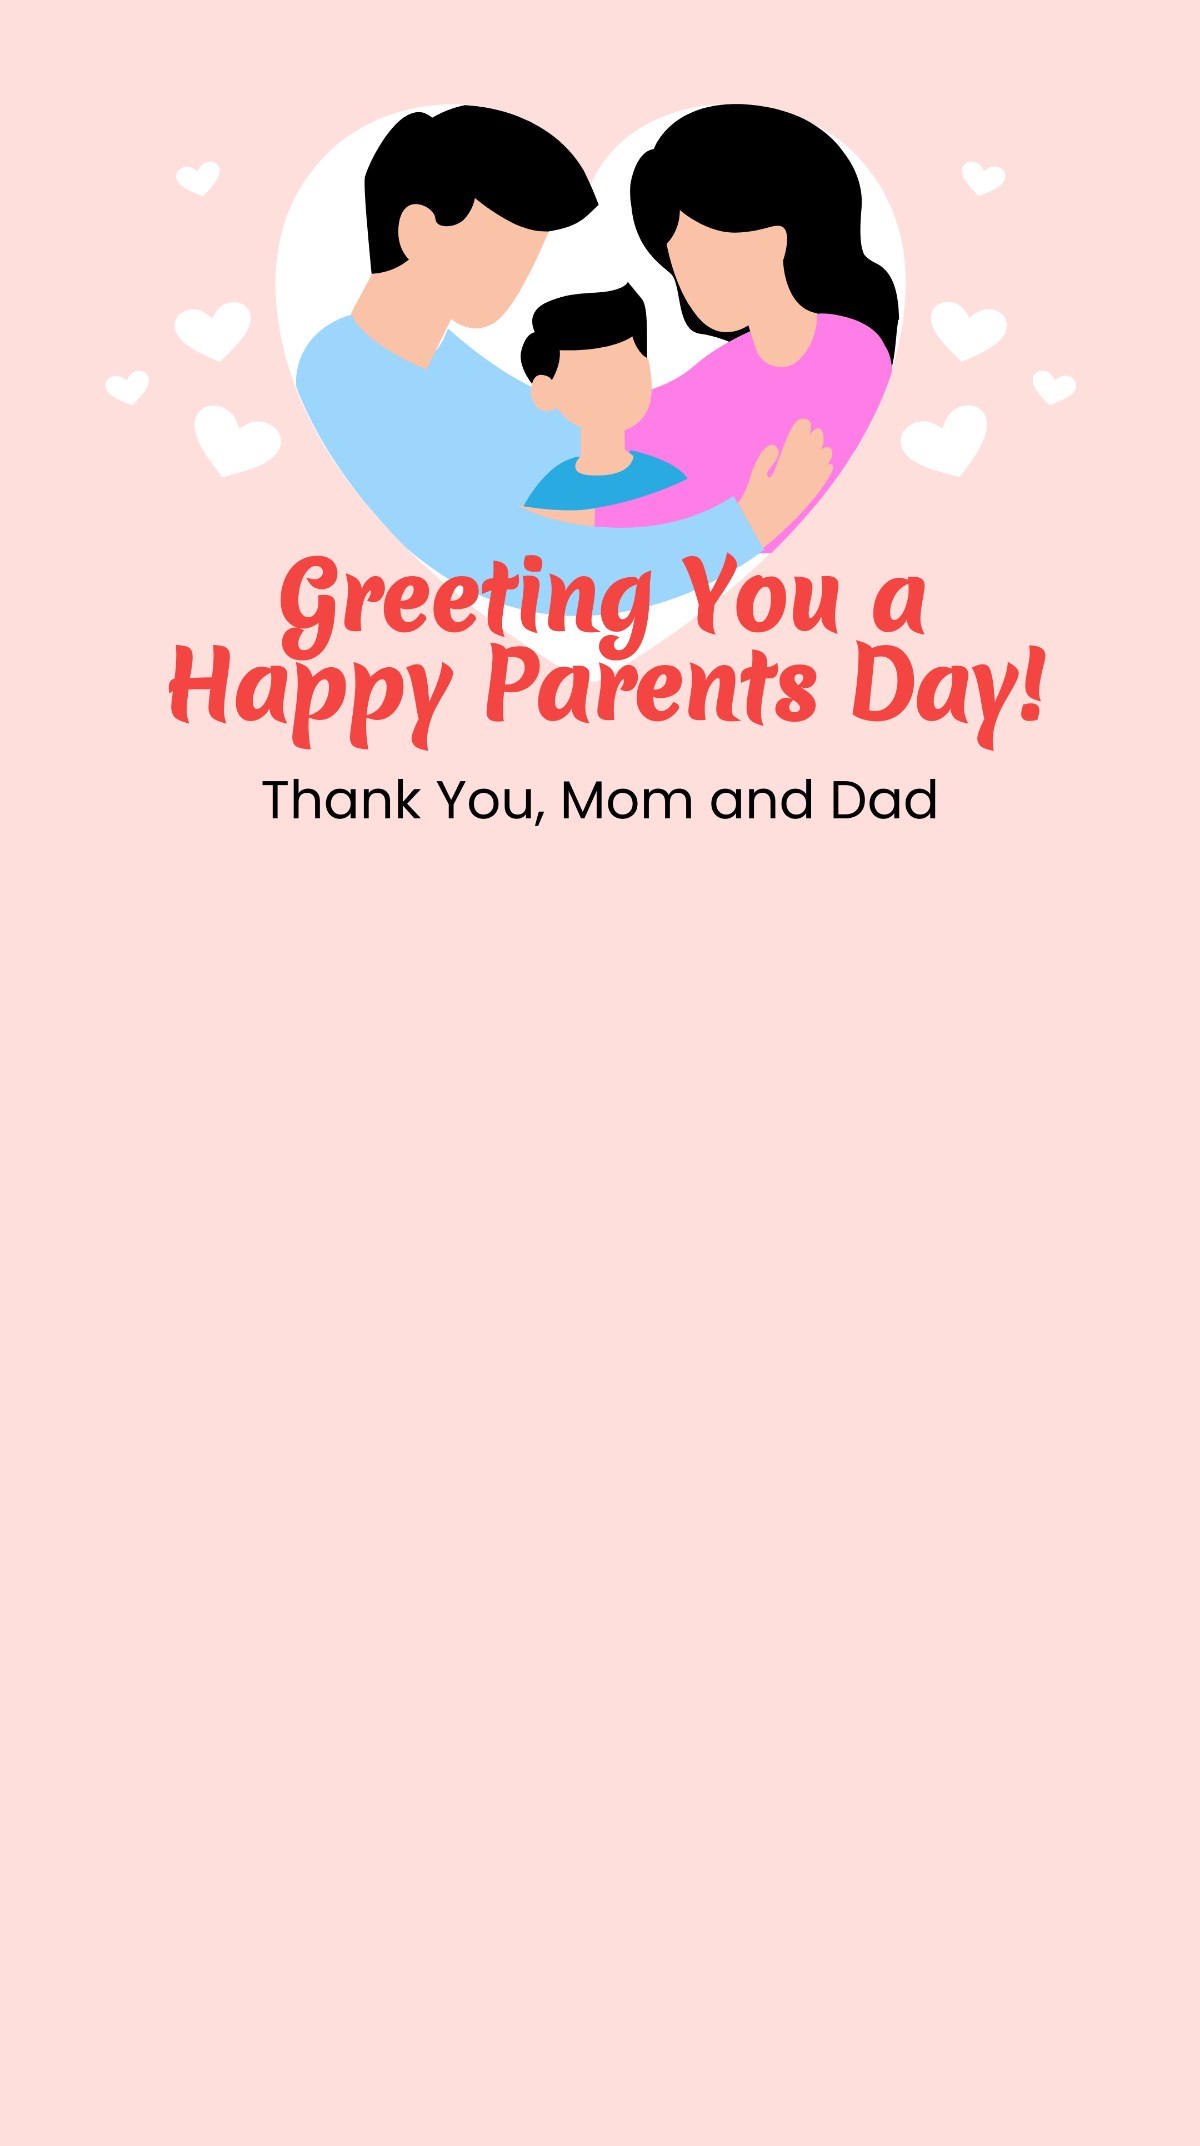 Happy Parents Day Snapchat Geofilter